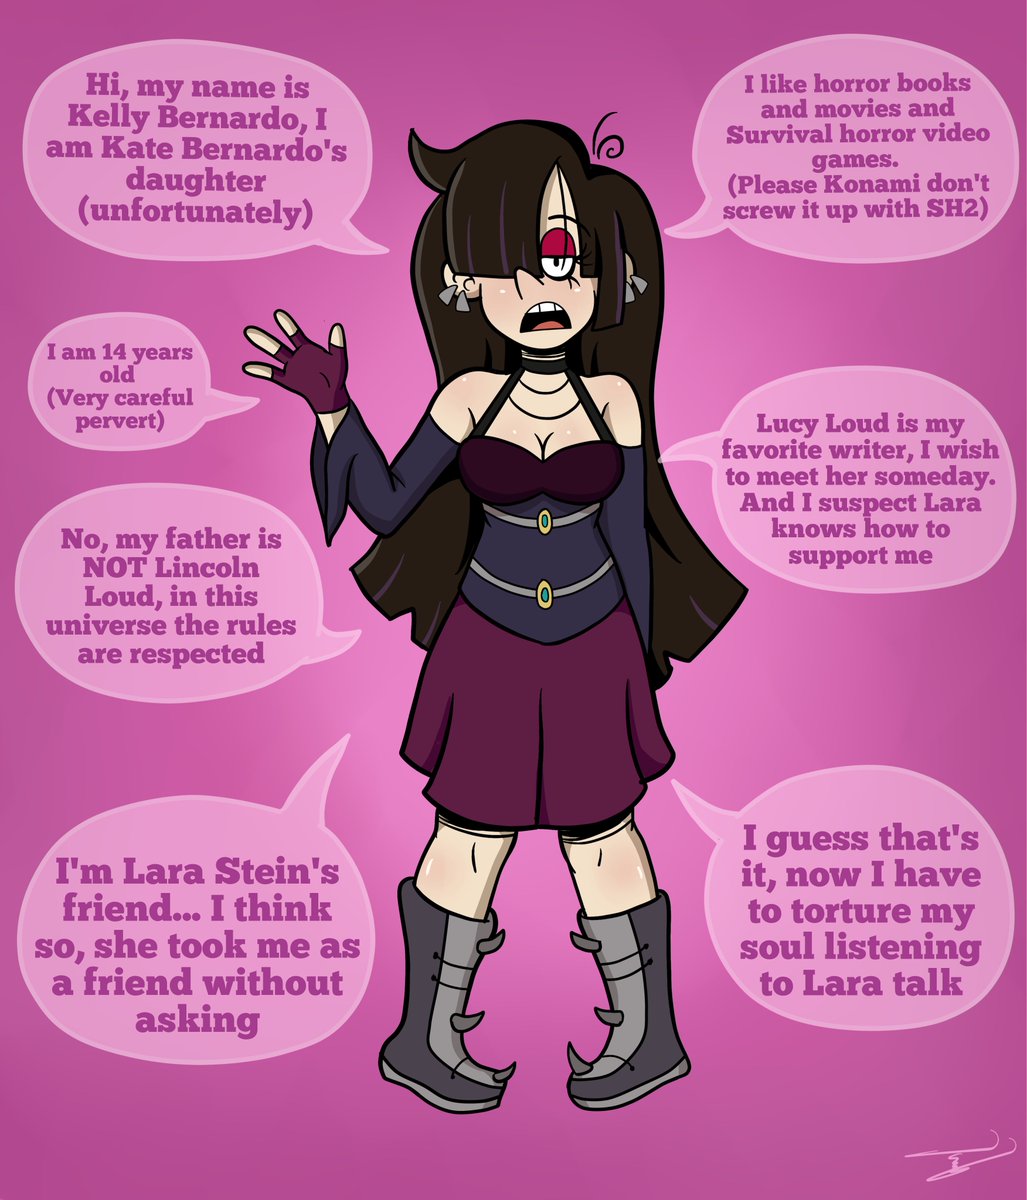 Happy #WorldGothDay
I leave you a drawing of my gothic Kelly Bernardo with some more information that I did for a contest
#gothday #gothic #KellyBernardo #TheLoudHouse #originalcharacter #gothgirl #draw